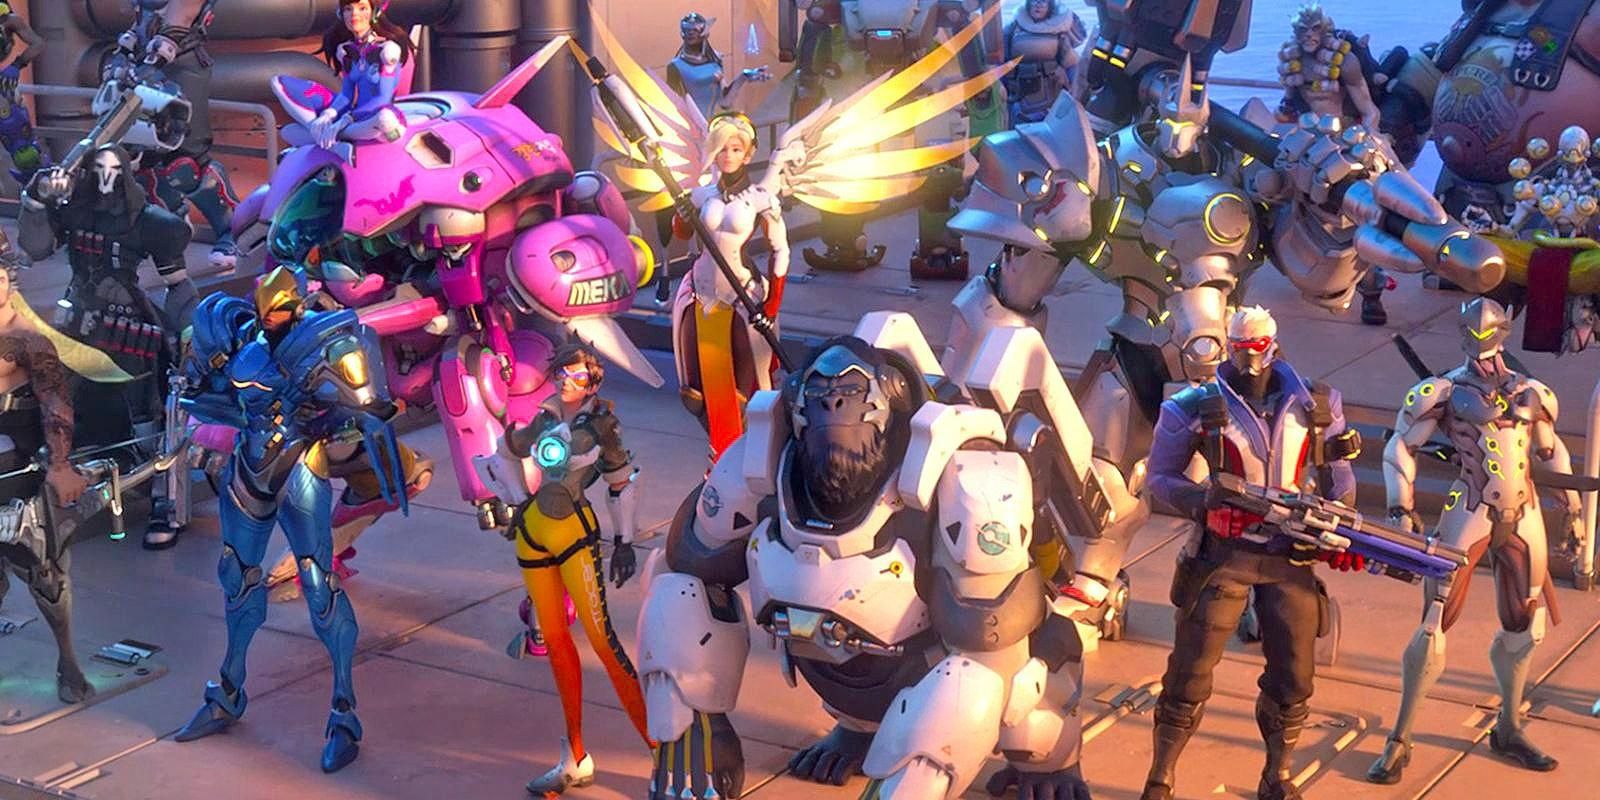 Group shot of the Overwatch cast